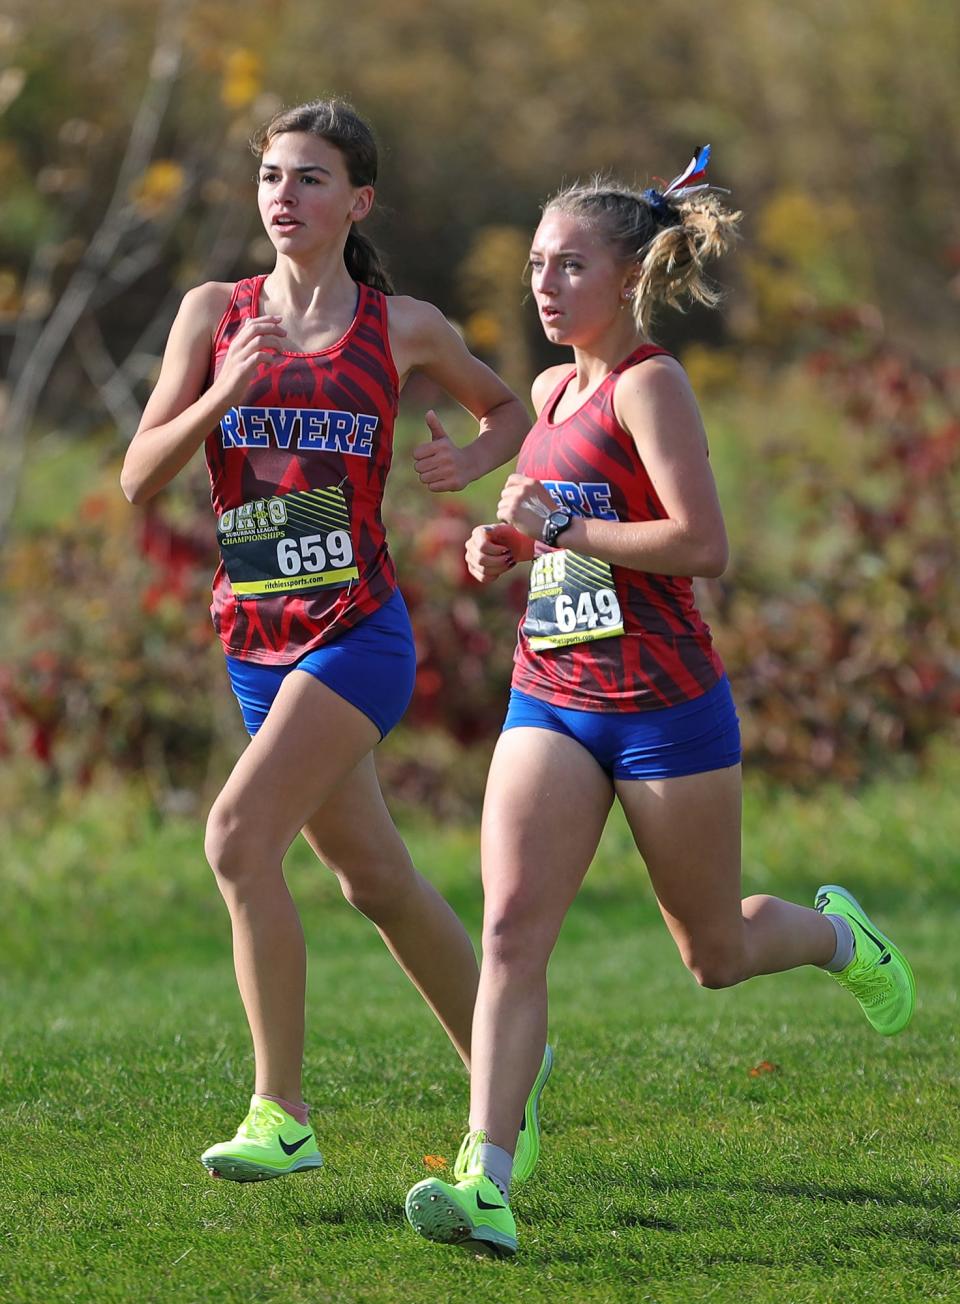 Revere’s Keira Lang, left, and Megan Diulus, right, run together during the Suburban League Cross Country Championships, Saturday, Oct. 15, 2022, in Norton, Ohio.